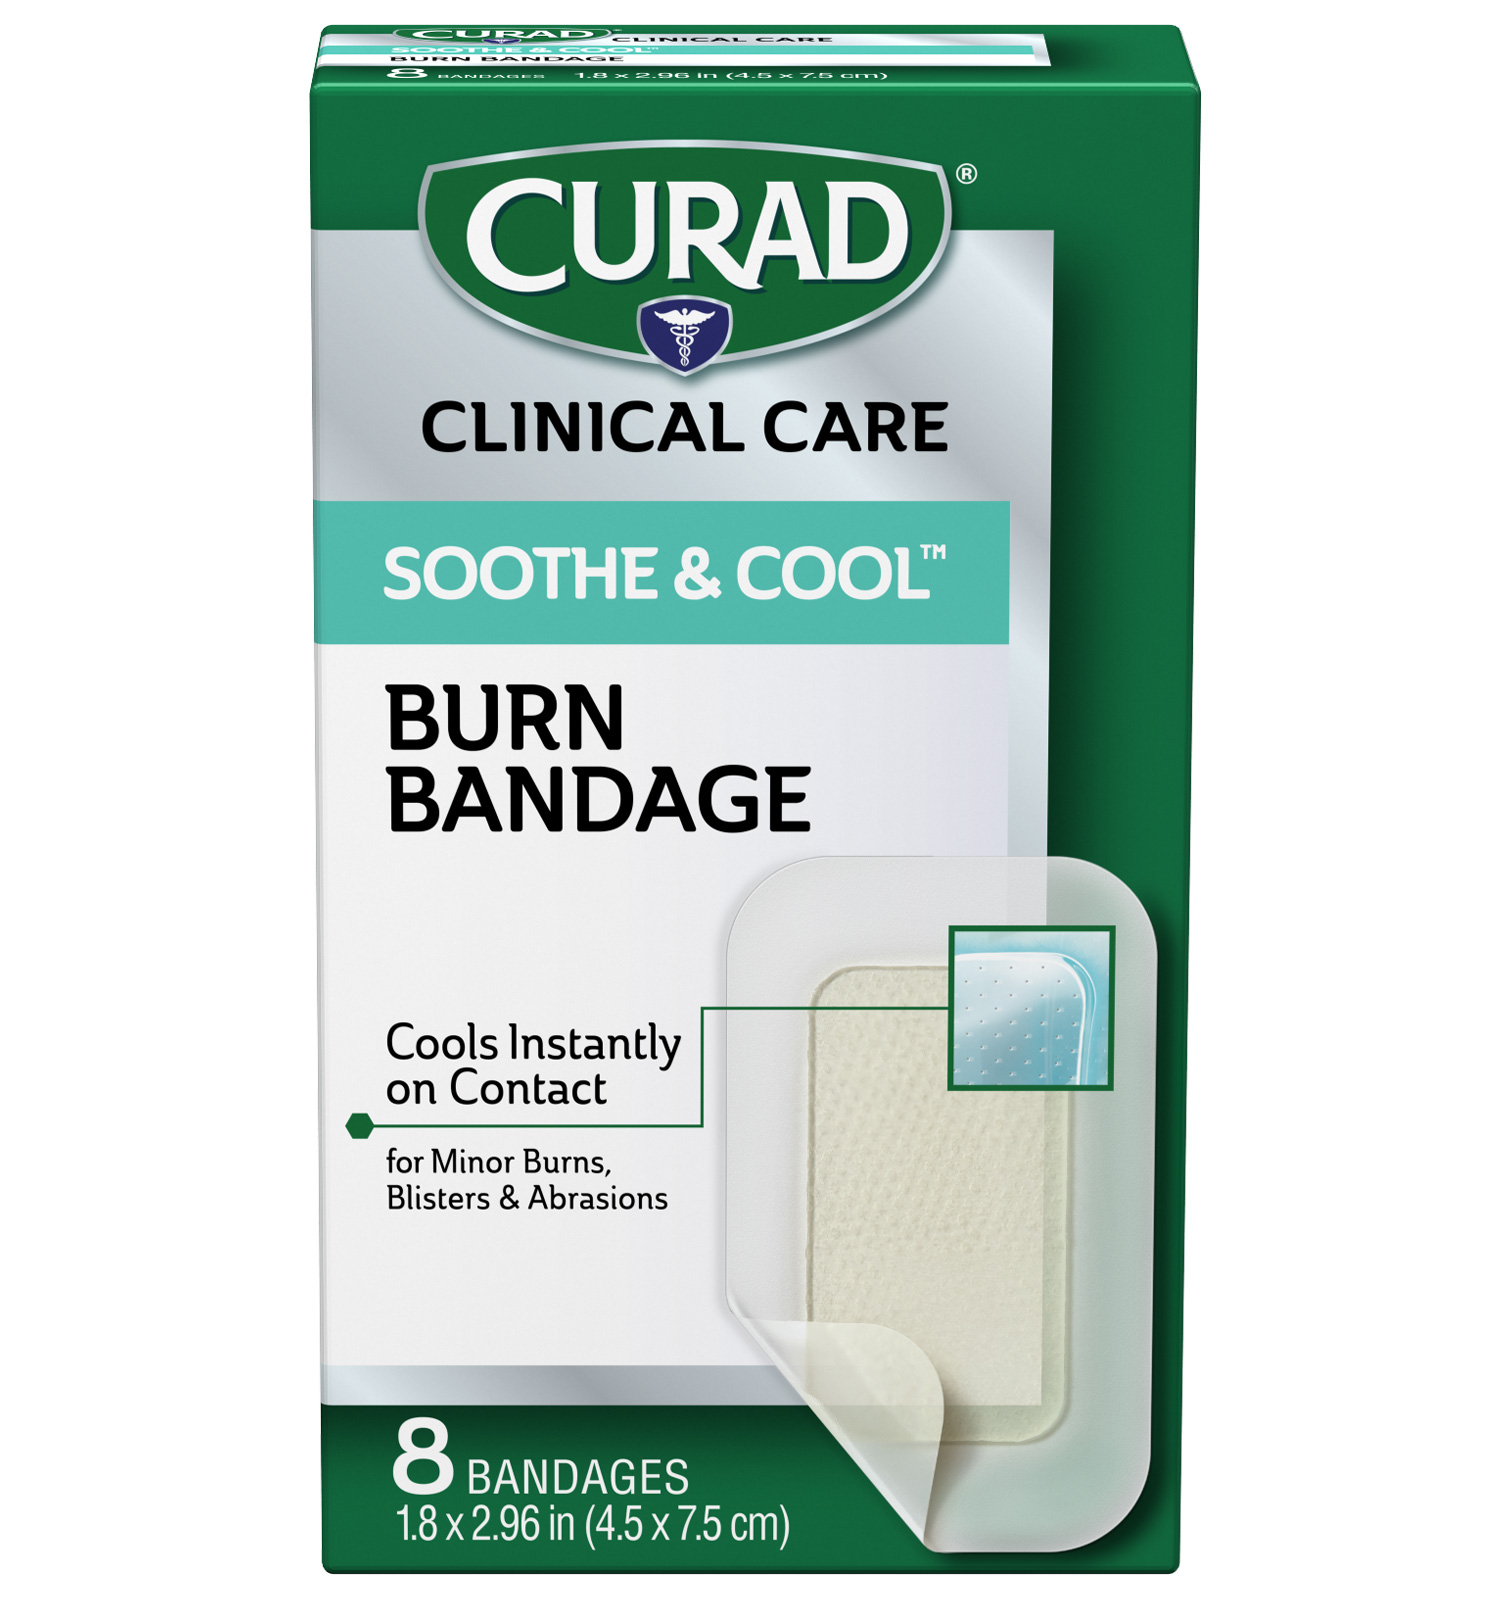 Soothe & Cool Burn Bandages, 2.96 x 1.8, 8 count